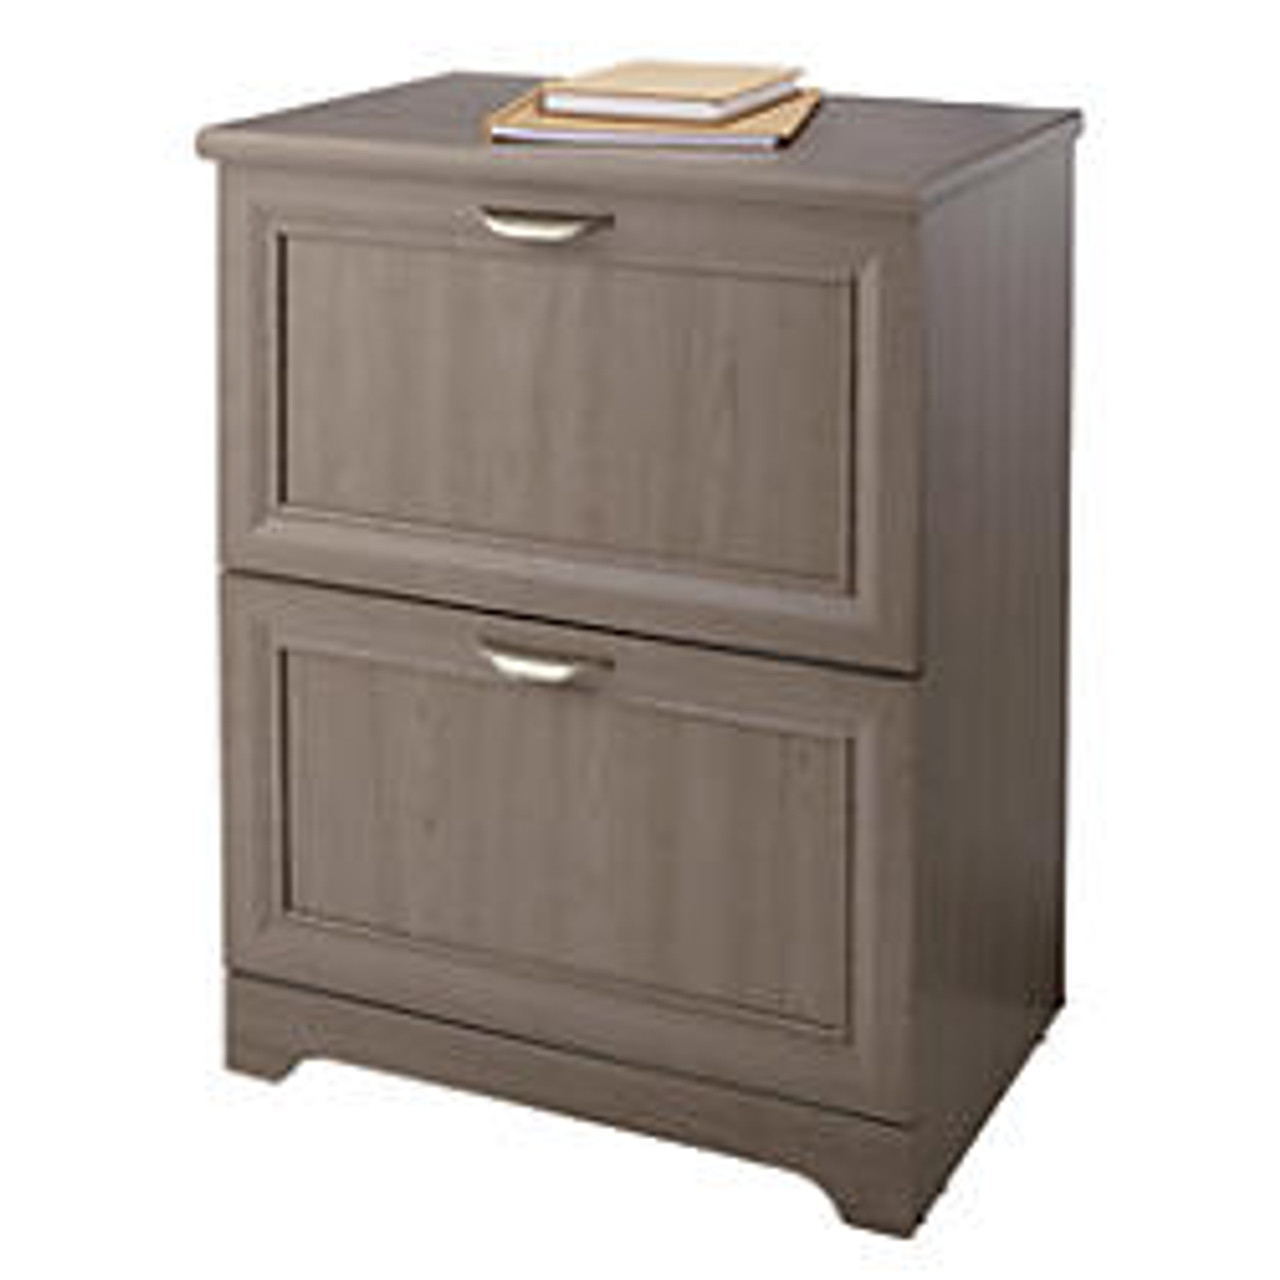 Realspace Magellan Collection 2 Drawer Lateral File Cabinet 30 Inch H X 23 1 2 Inch W X 16 1 2 Inch D Gray Office Wagon